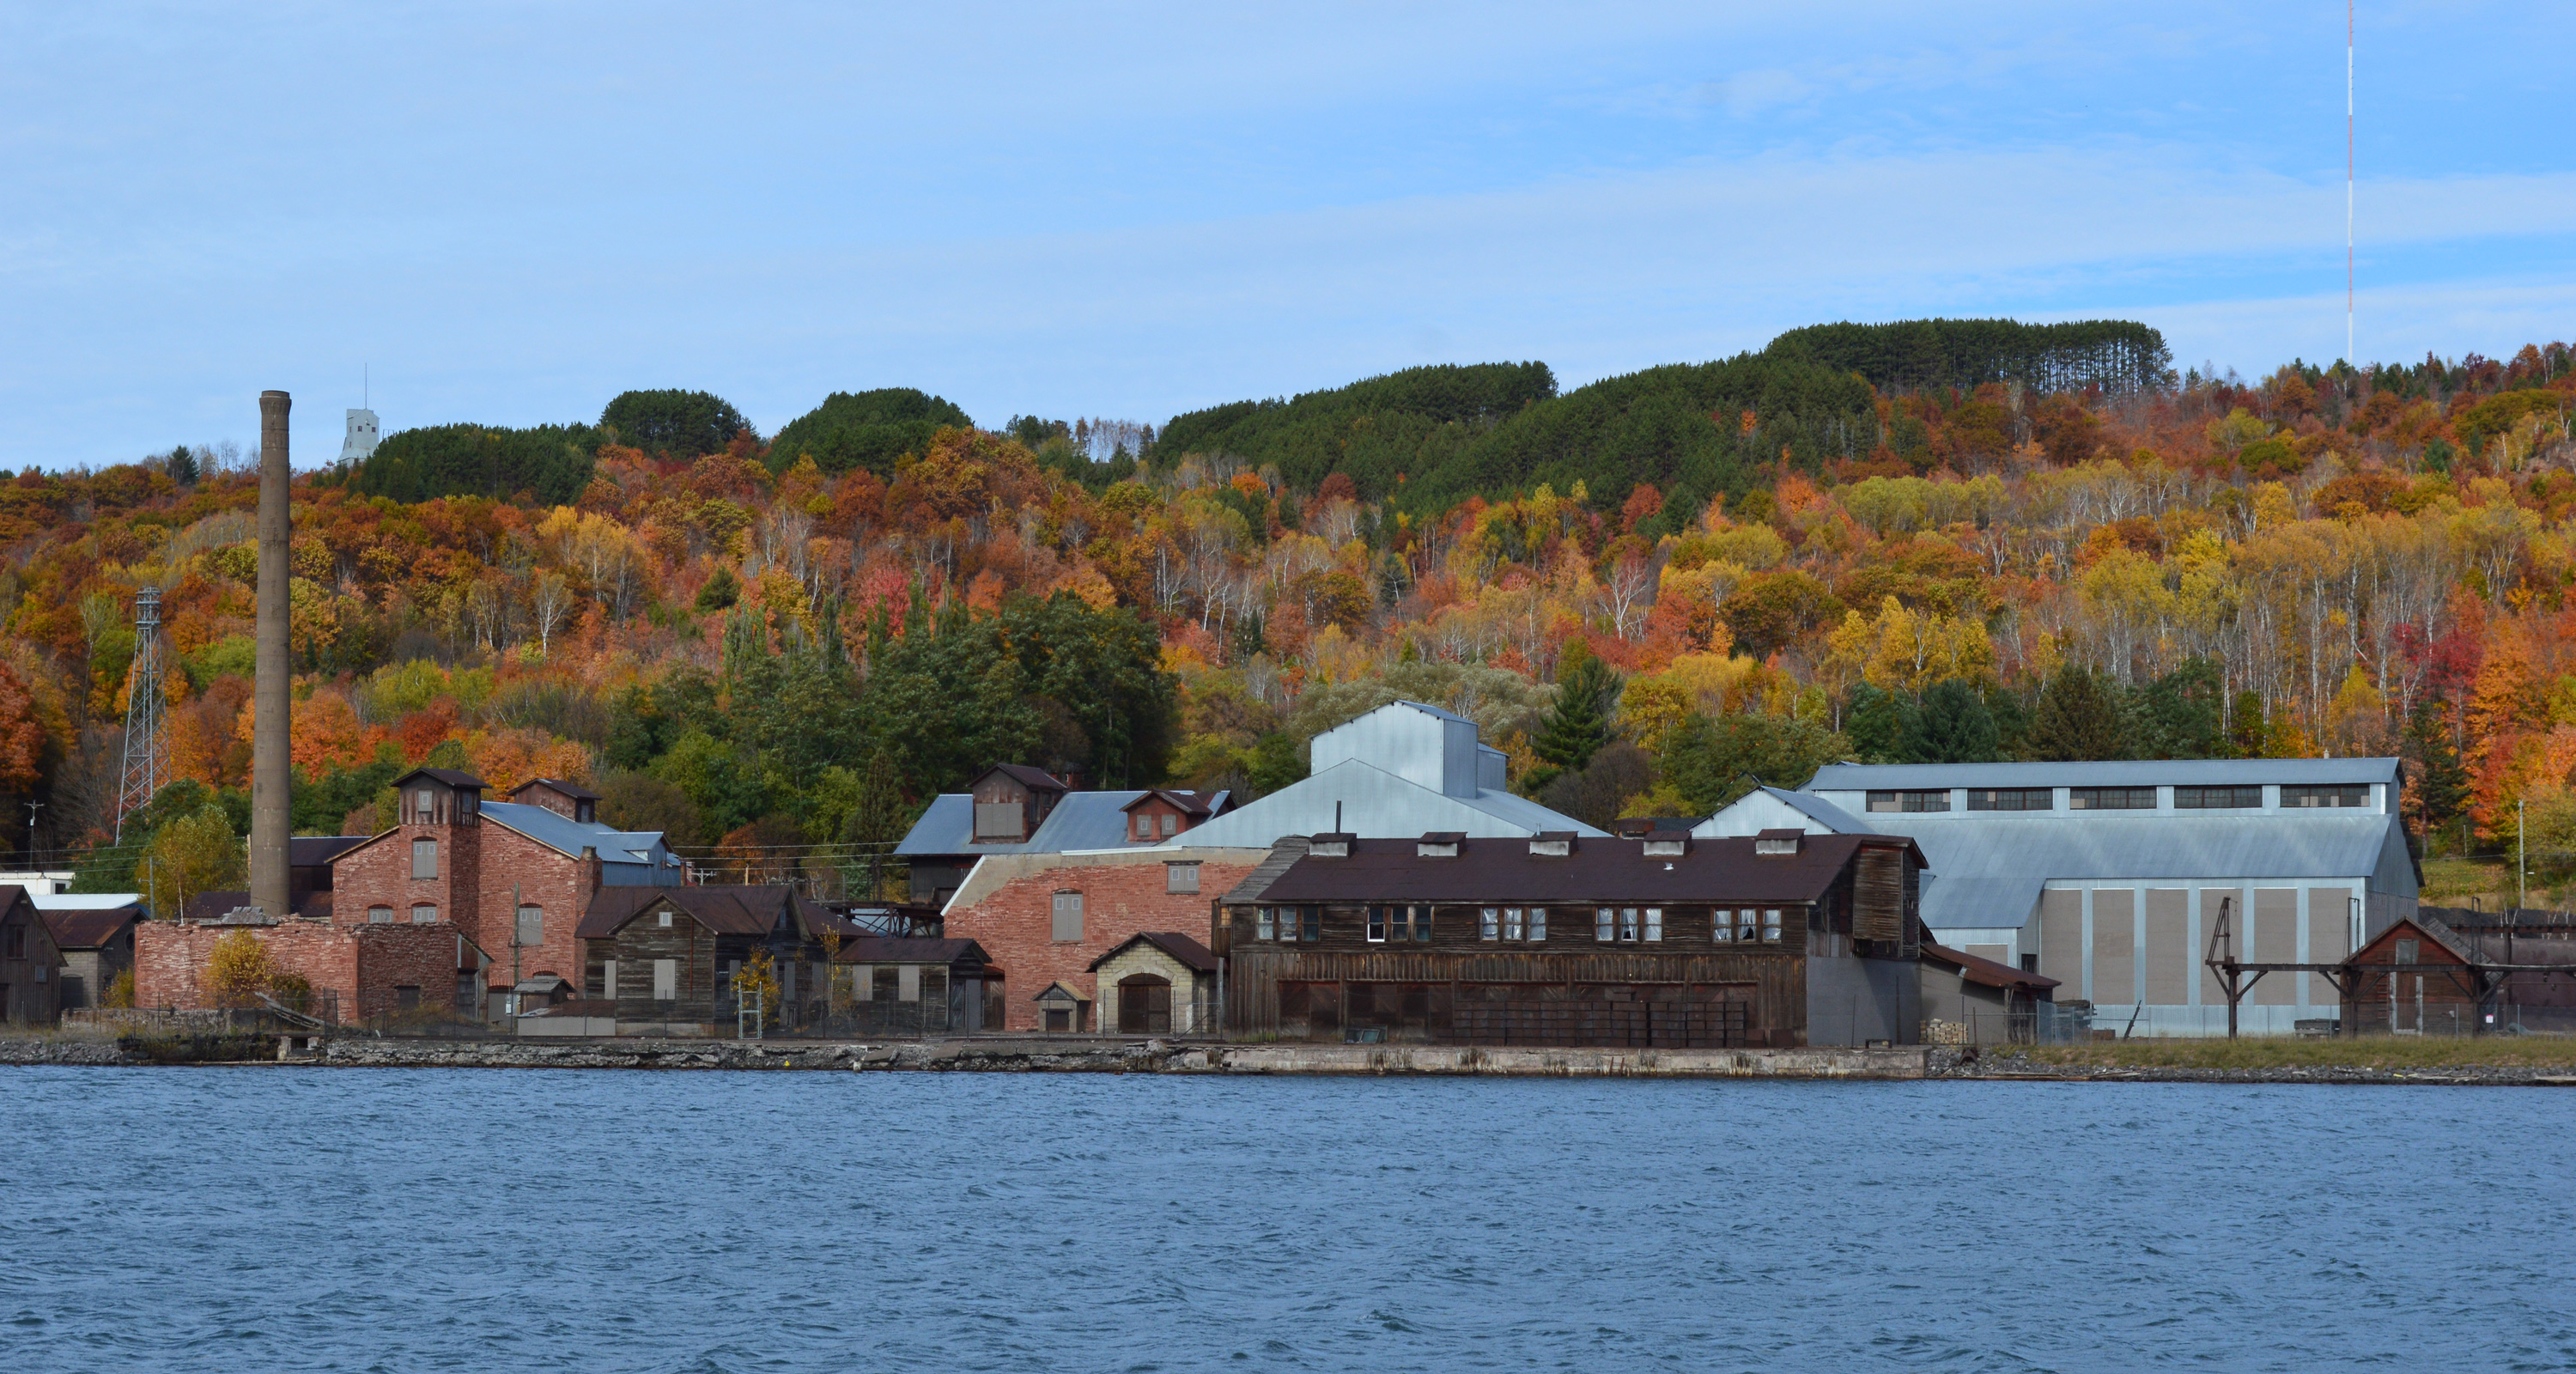 With a colorful autumn background, numerous industrial buildings sit on the waterfront